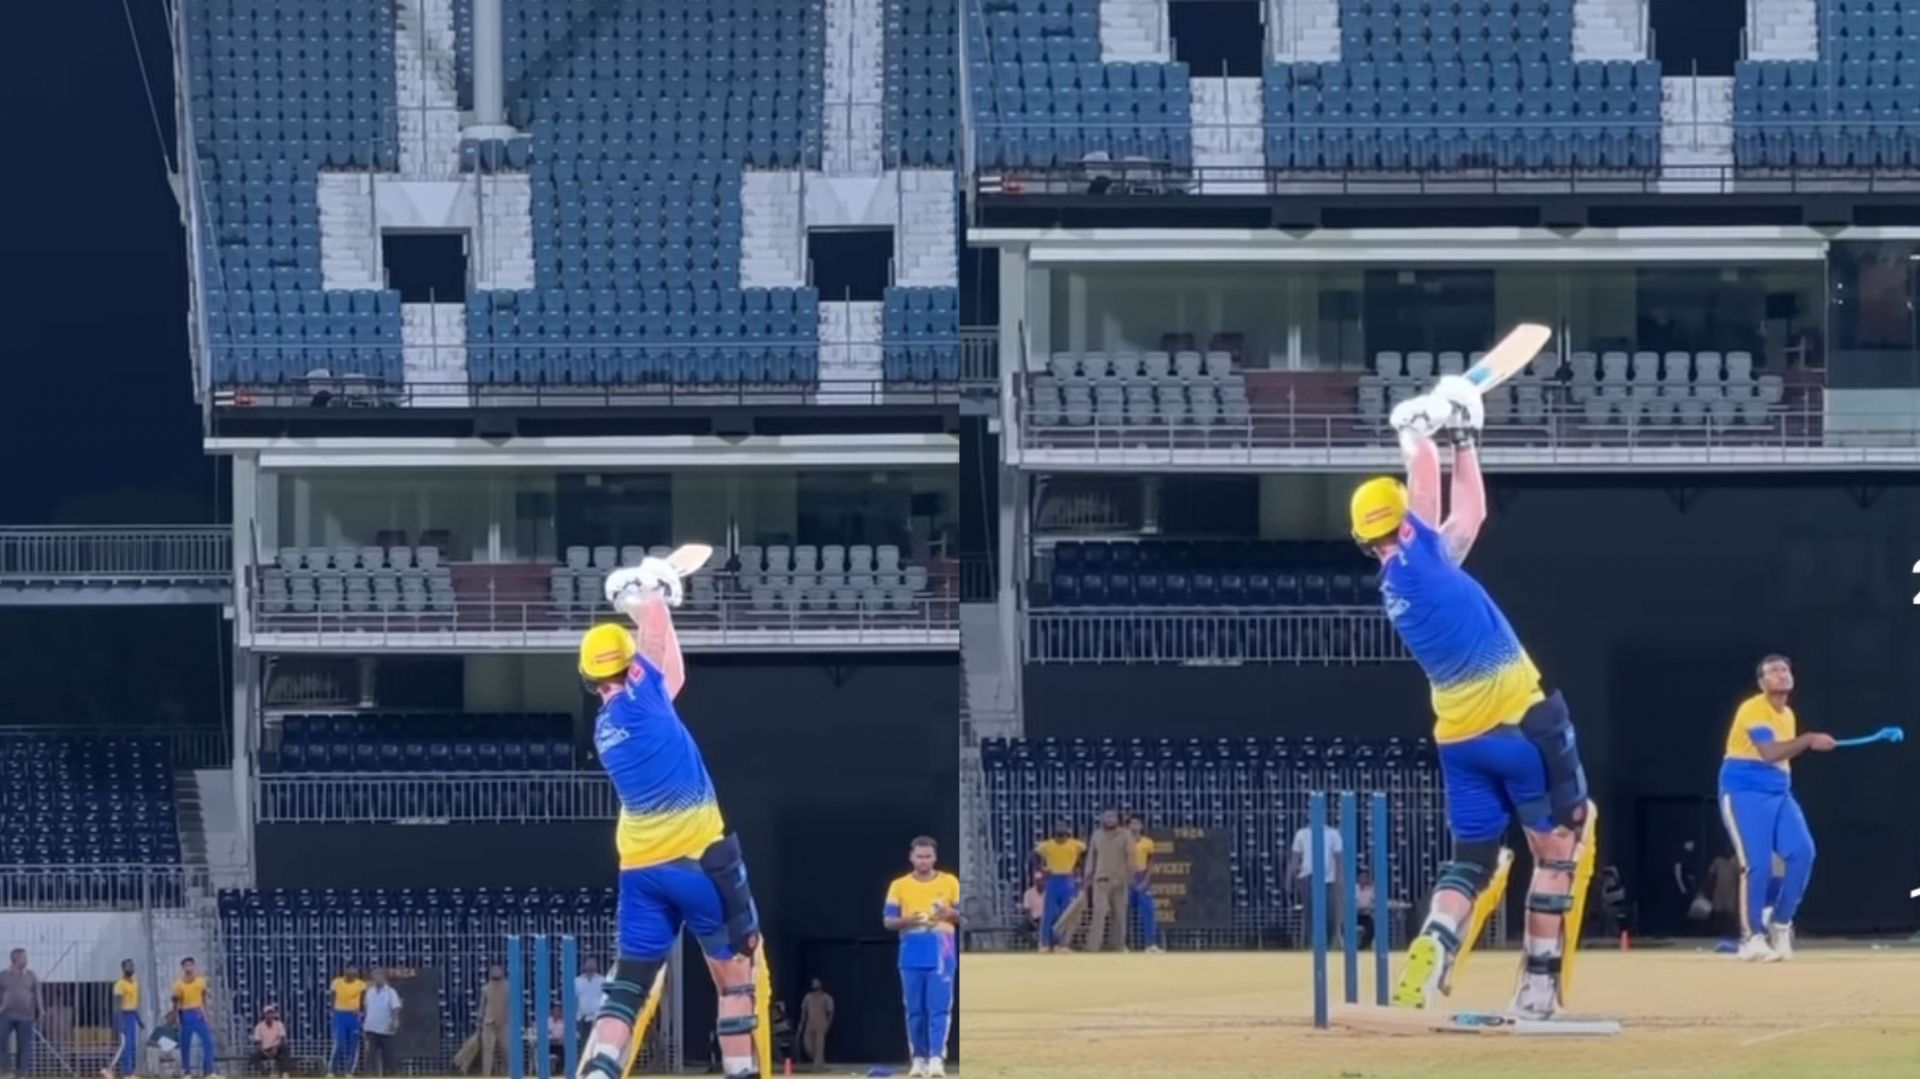 Ben Stokes looked in fine touch in the practice session (Image: Instagram/CSK)